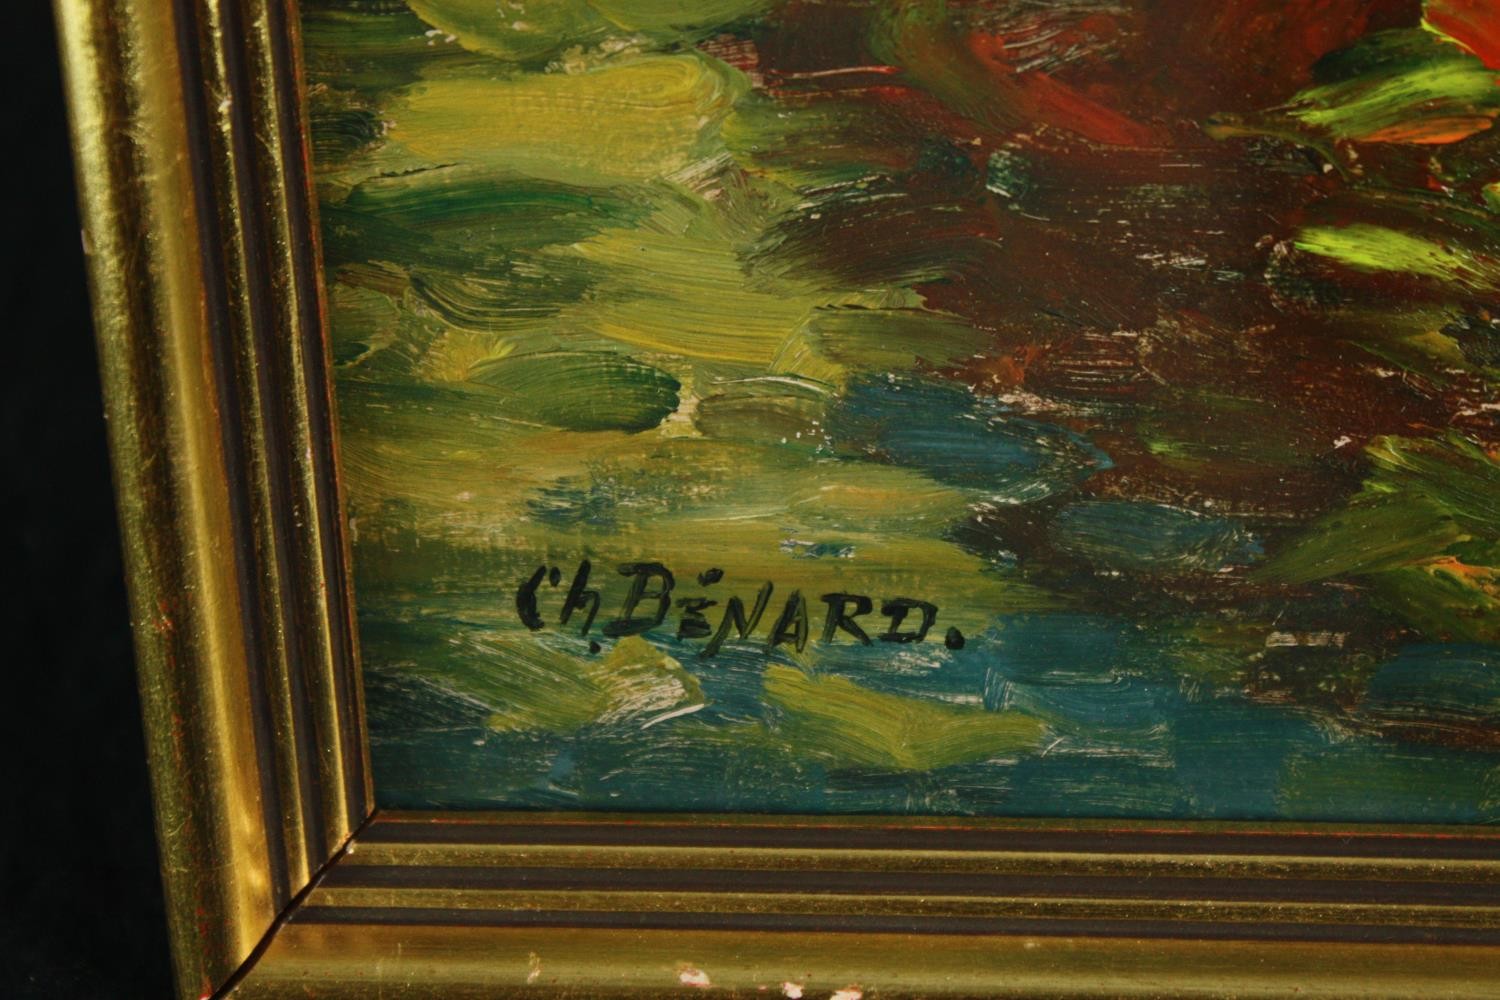 Charles Benard. Oil on board. An early twentieth century impressionist style painting. Boats at - Image 3 of 4